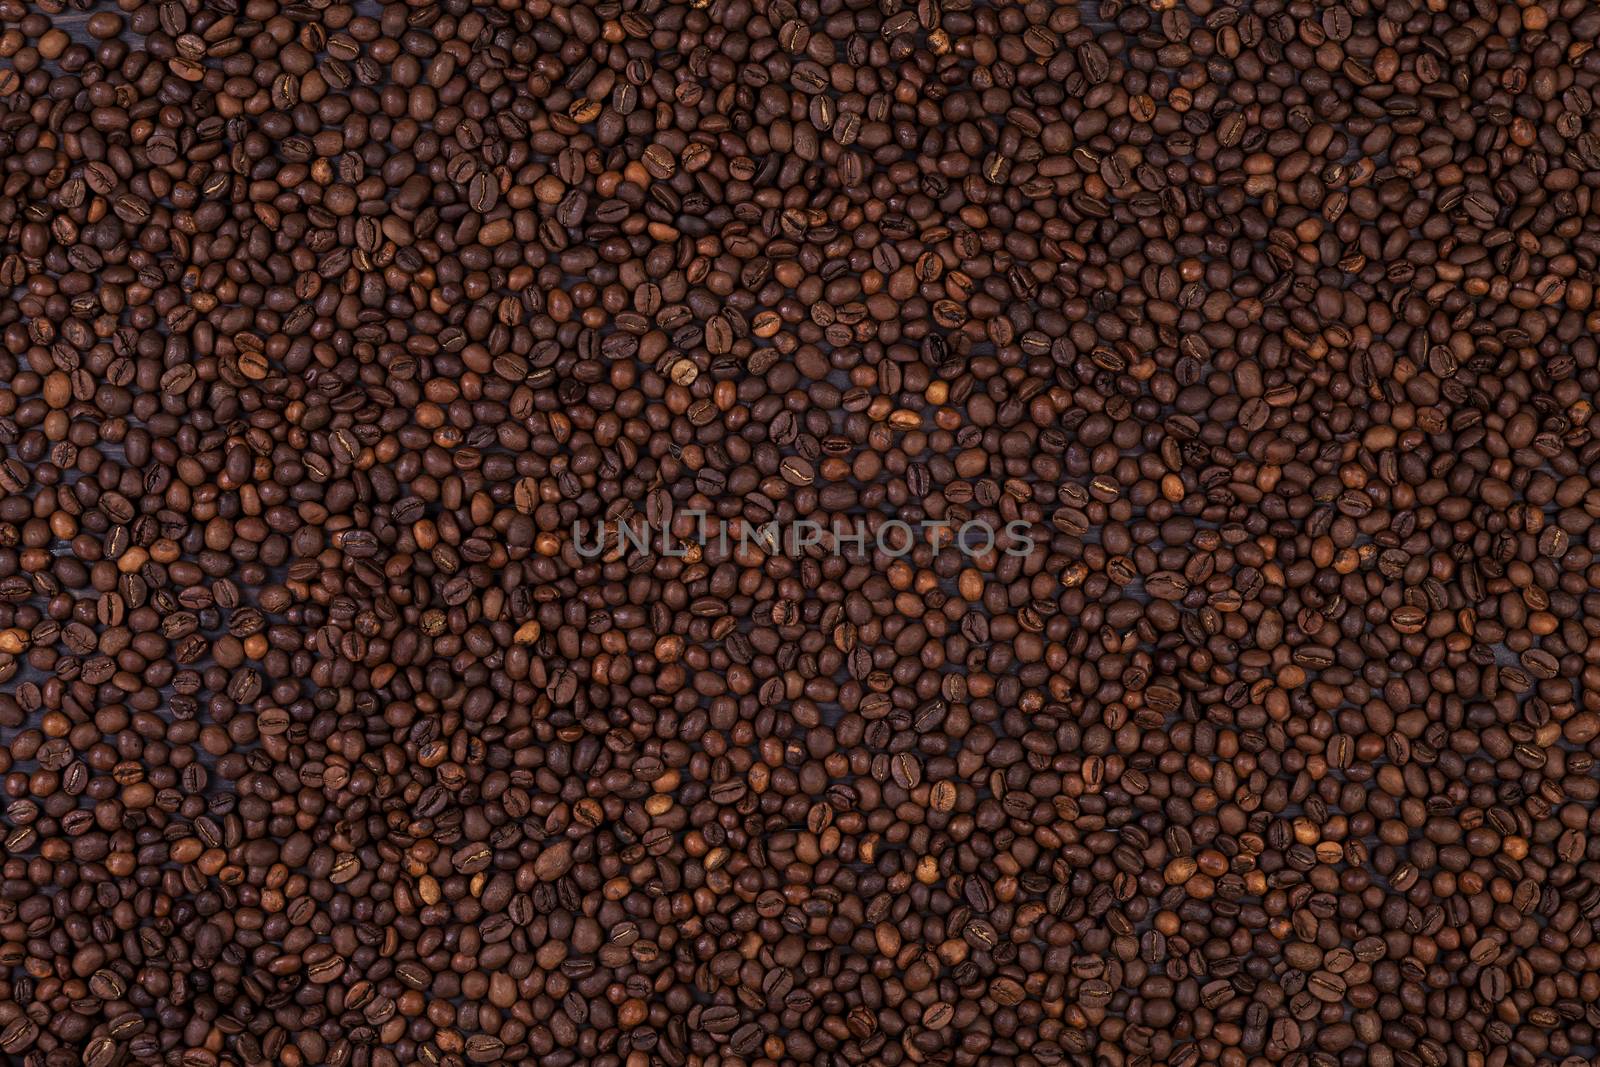 Coffee beans background, coffee texture, top view, copy space